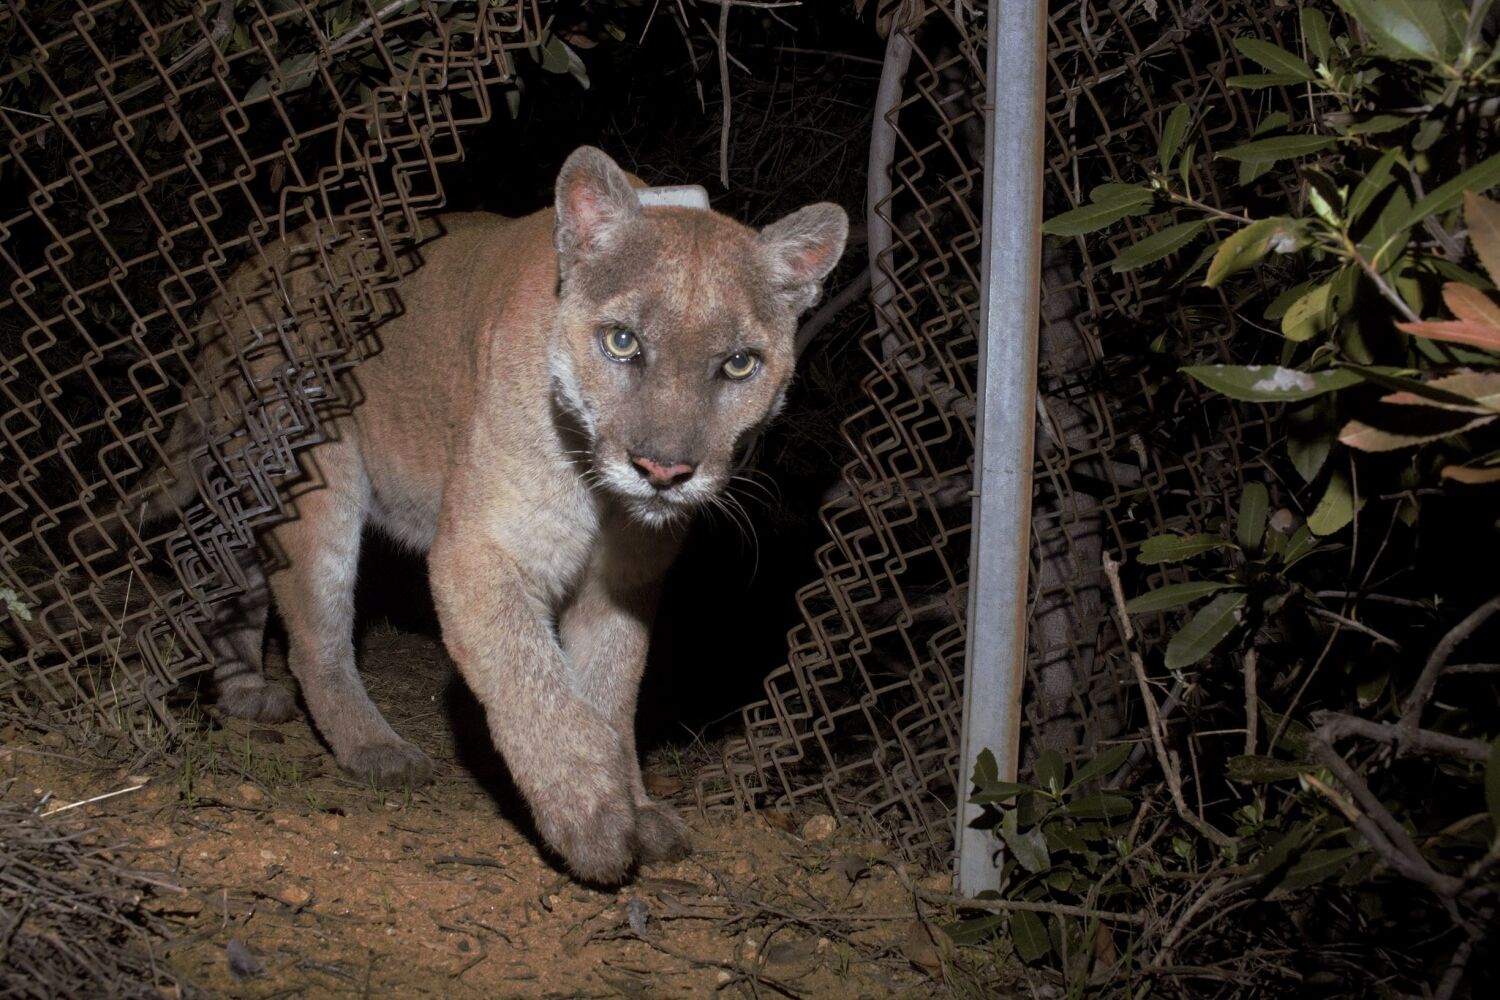 'Incredibly difficult': Why officials euthanized ailing mountain lion P-22